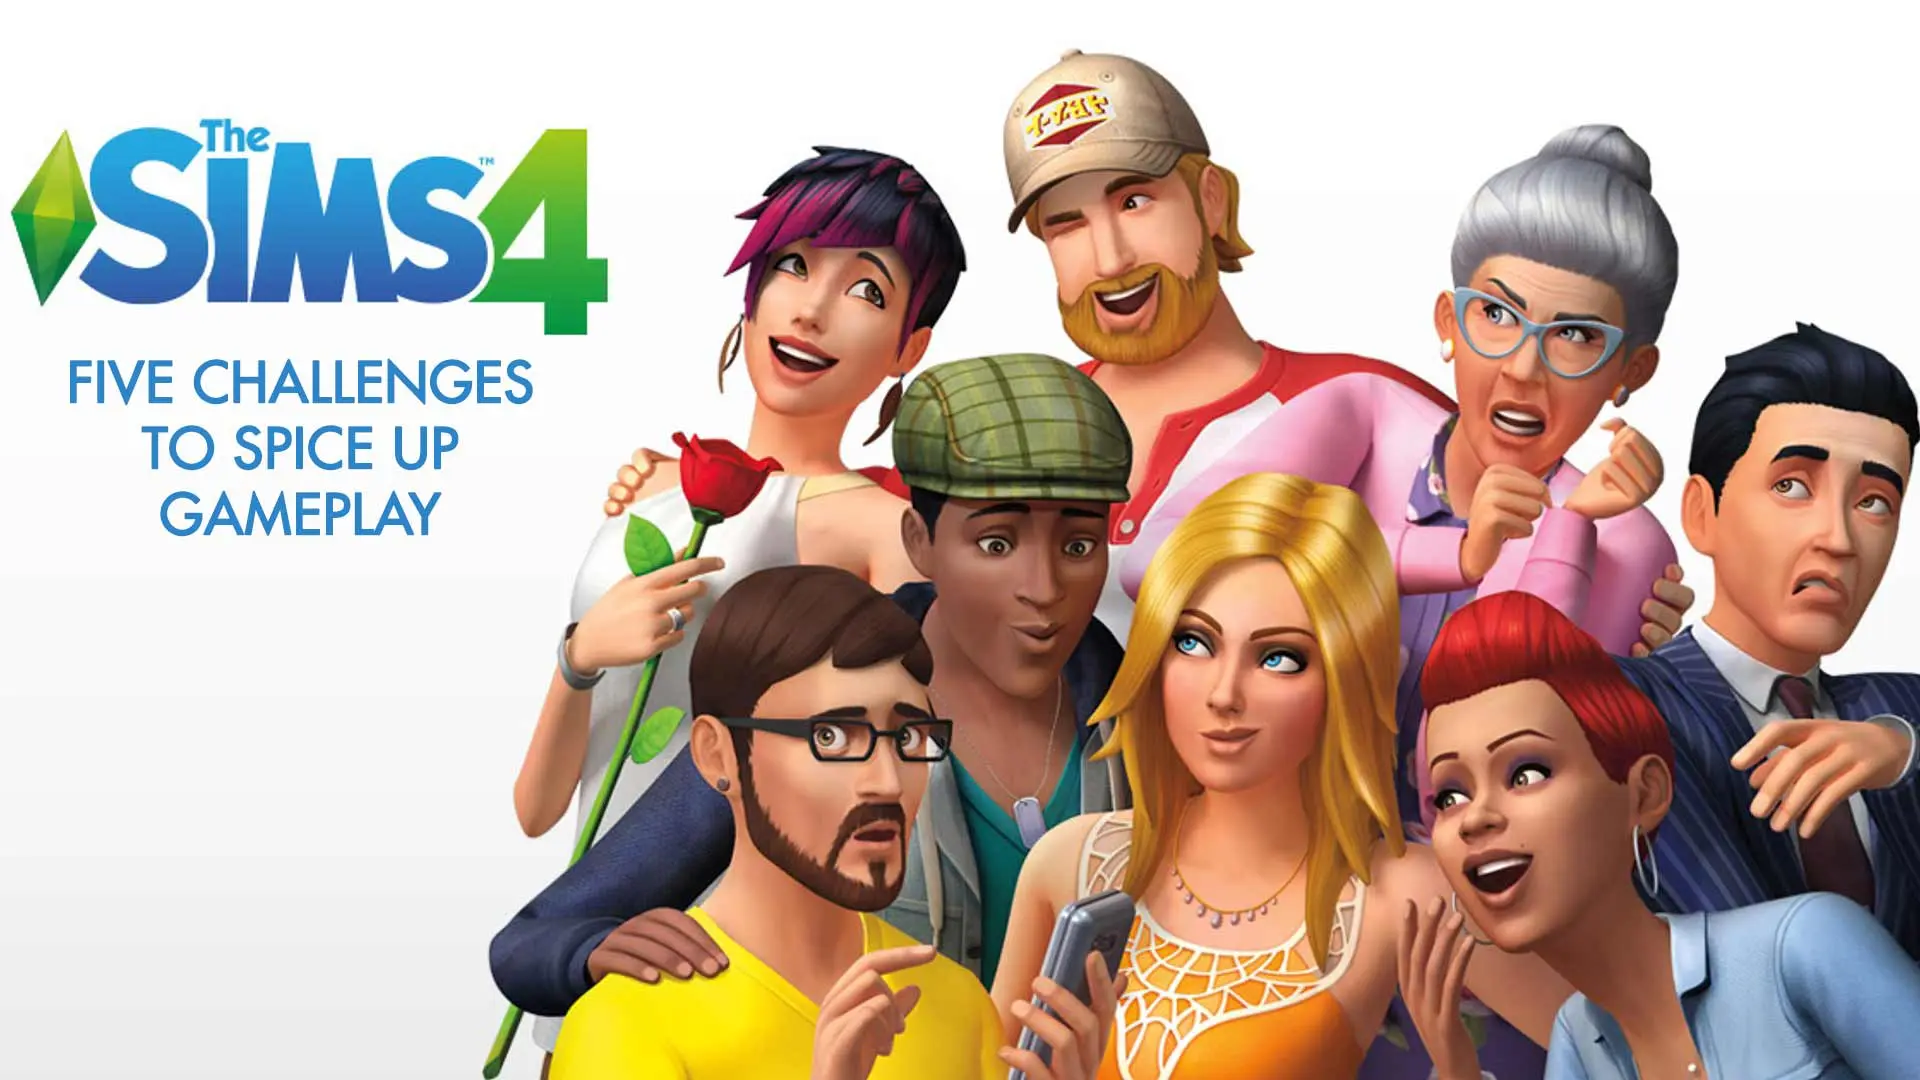 The Sims 4 is now free to play